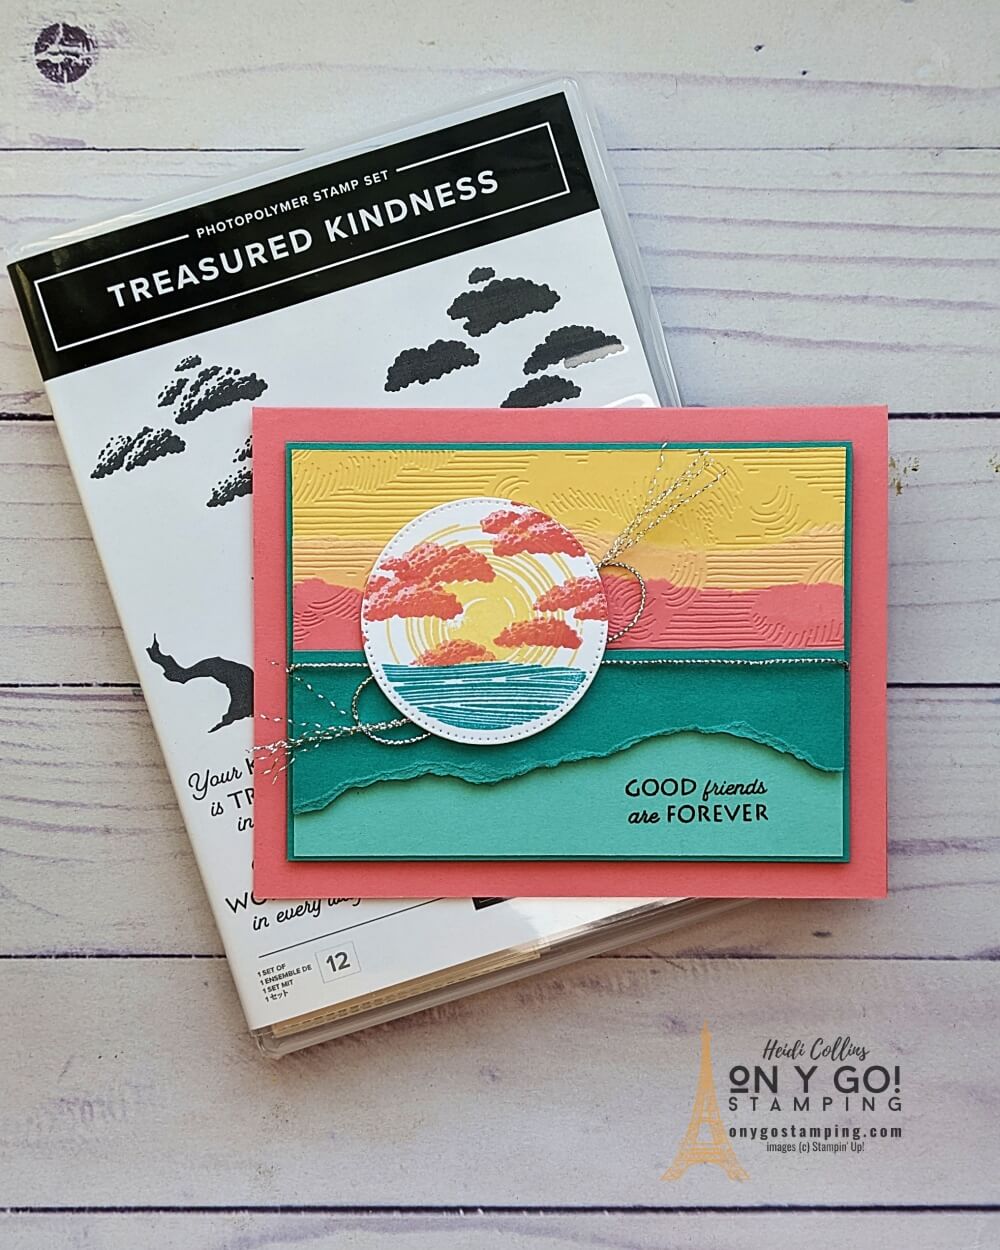 Use the Treasured Kindness stamp set from Stampin' Up!® to create a beautiful summer card with a setting sun. 